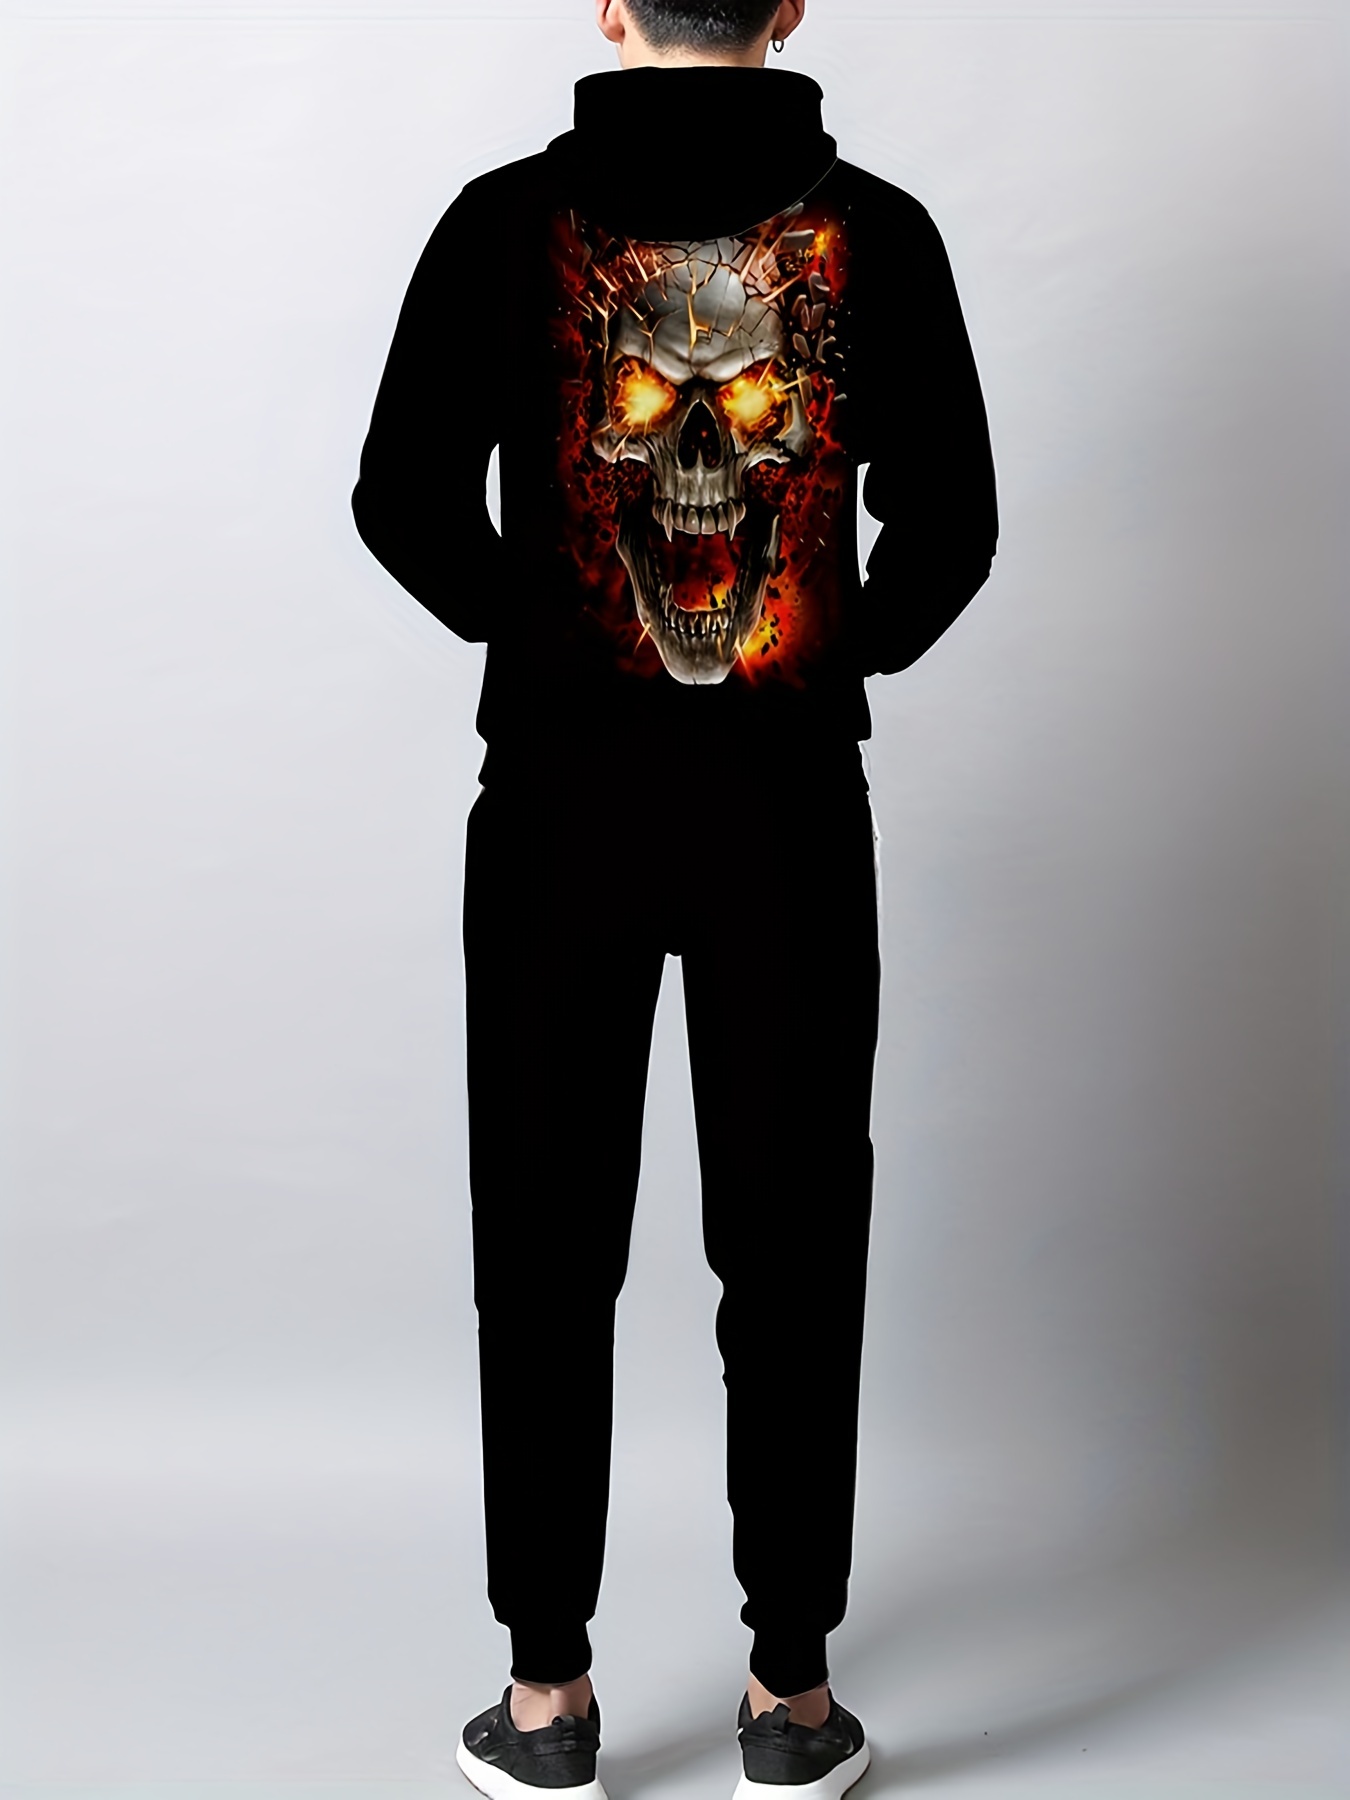 Skull 3D Printed Fashionable Jogging Suits Mens Set Casual Hoodies And  Jogger Pants For Autumn/Winter Fashion Trend Oversized From Hregh, $35.13